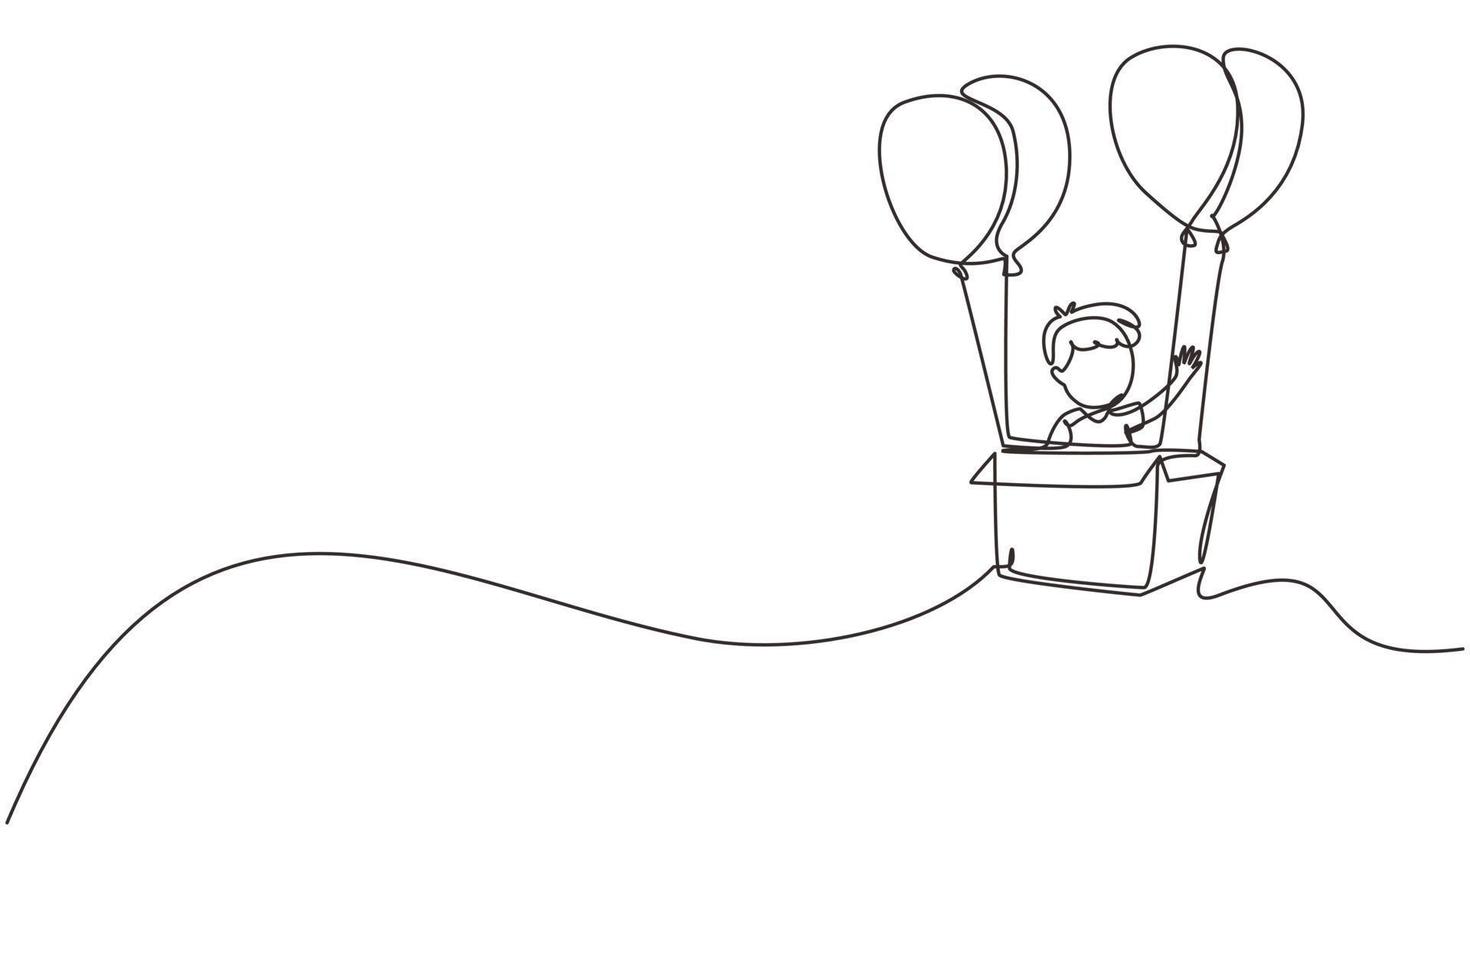 Single one line drawing cute boy sitting in cardboard box with balloons. Little pilot of hot air balloon. Creative kid character playing hot air balloon. Continuous line draw design graphic vector